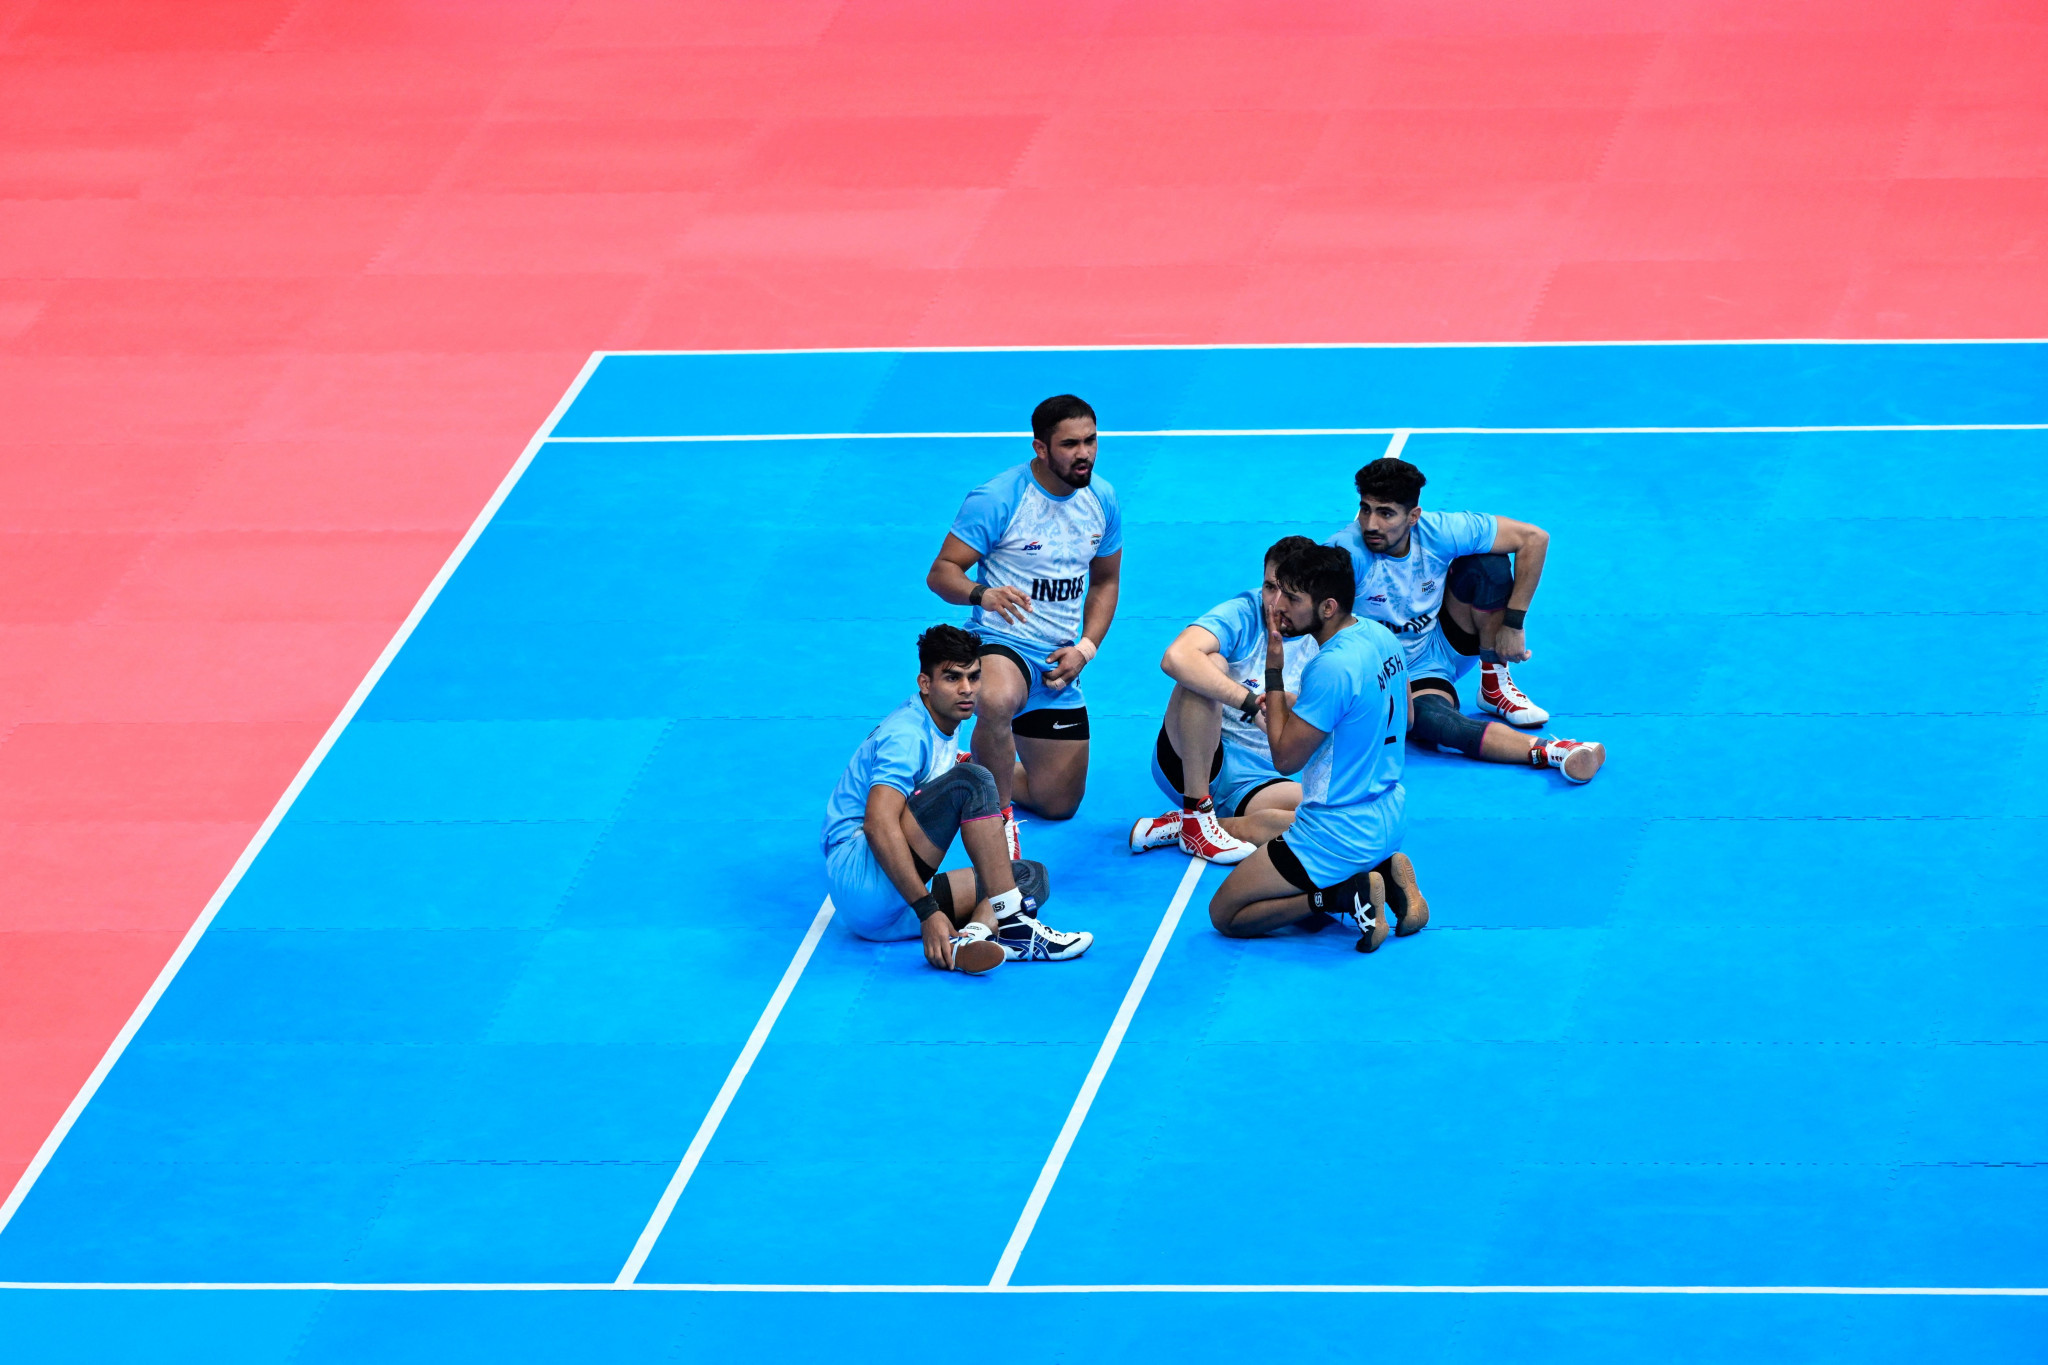 Indian players stage a sit-down protest in the men's kabaddi final against Iran before emerging victorious following a long delay ©Getty Images